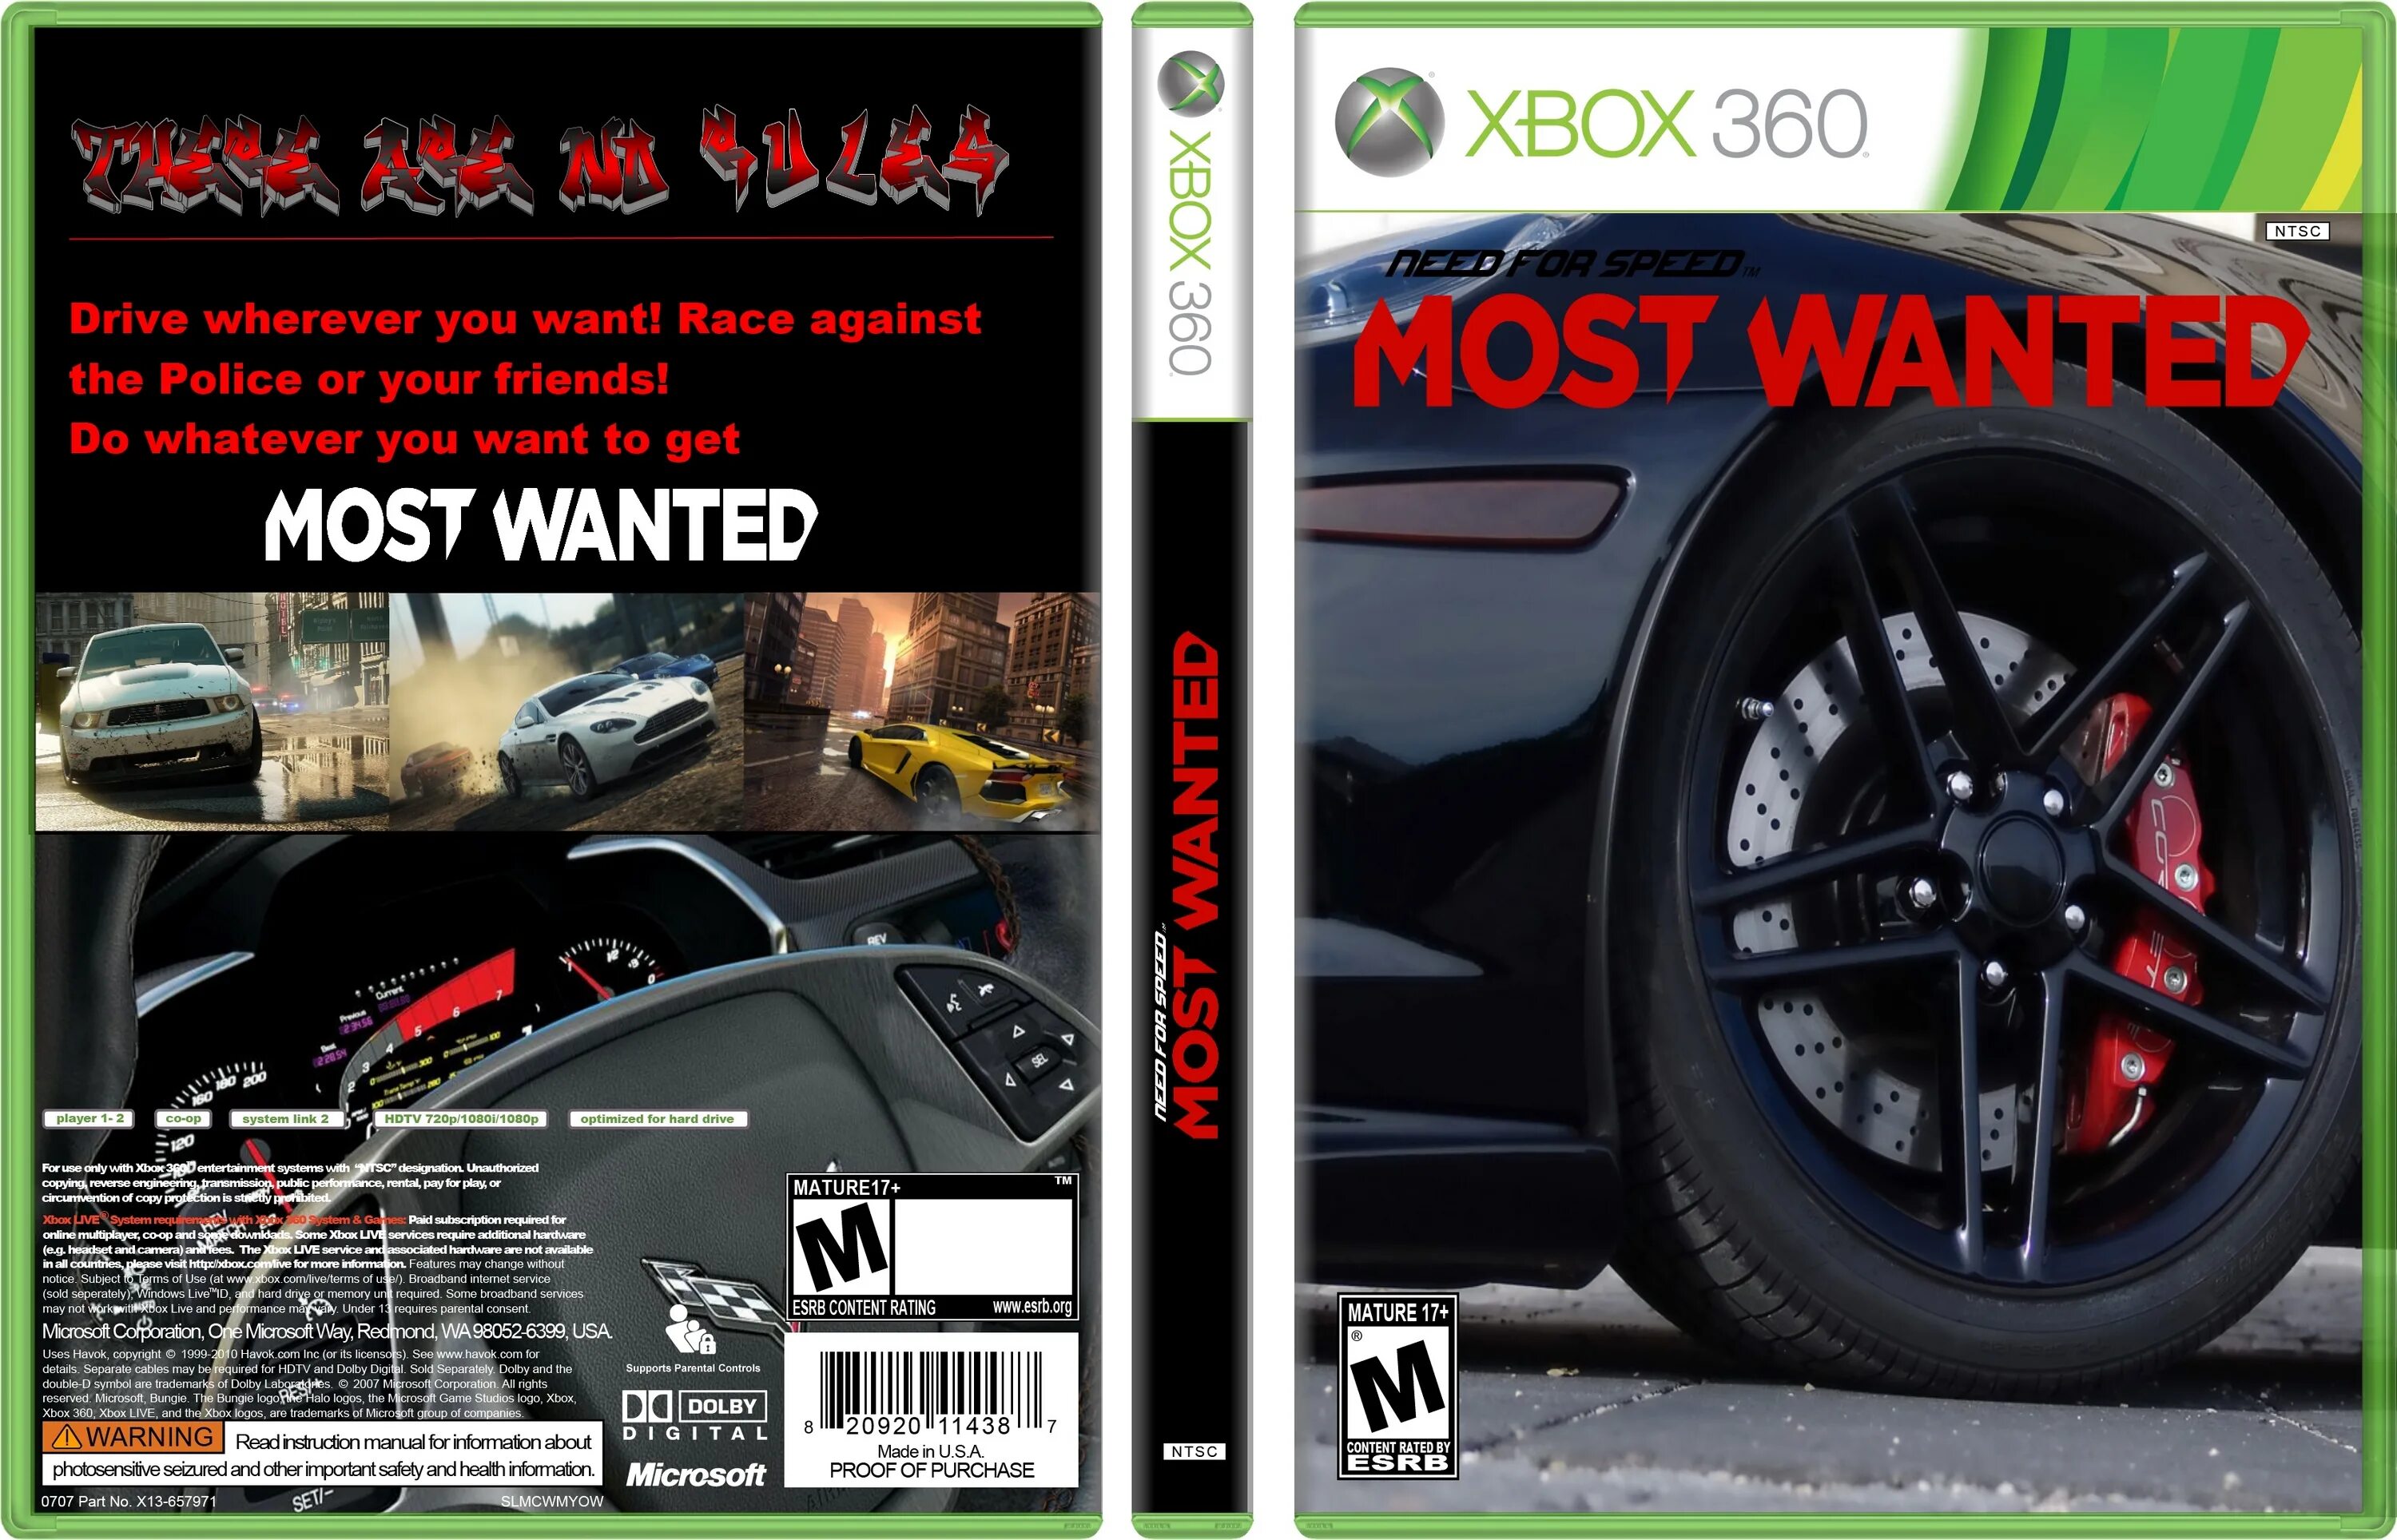 Need for Speed most wanted Xbox 360. NFS most wanted диск Xbox 360. Need for Speed most wanted Xbox 360 обложка. Need for Speed most wanted 2005 Xbox 360 обложка. Nfs most wanted xbox